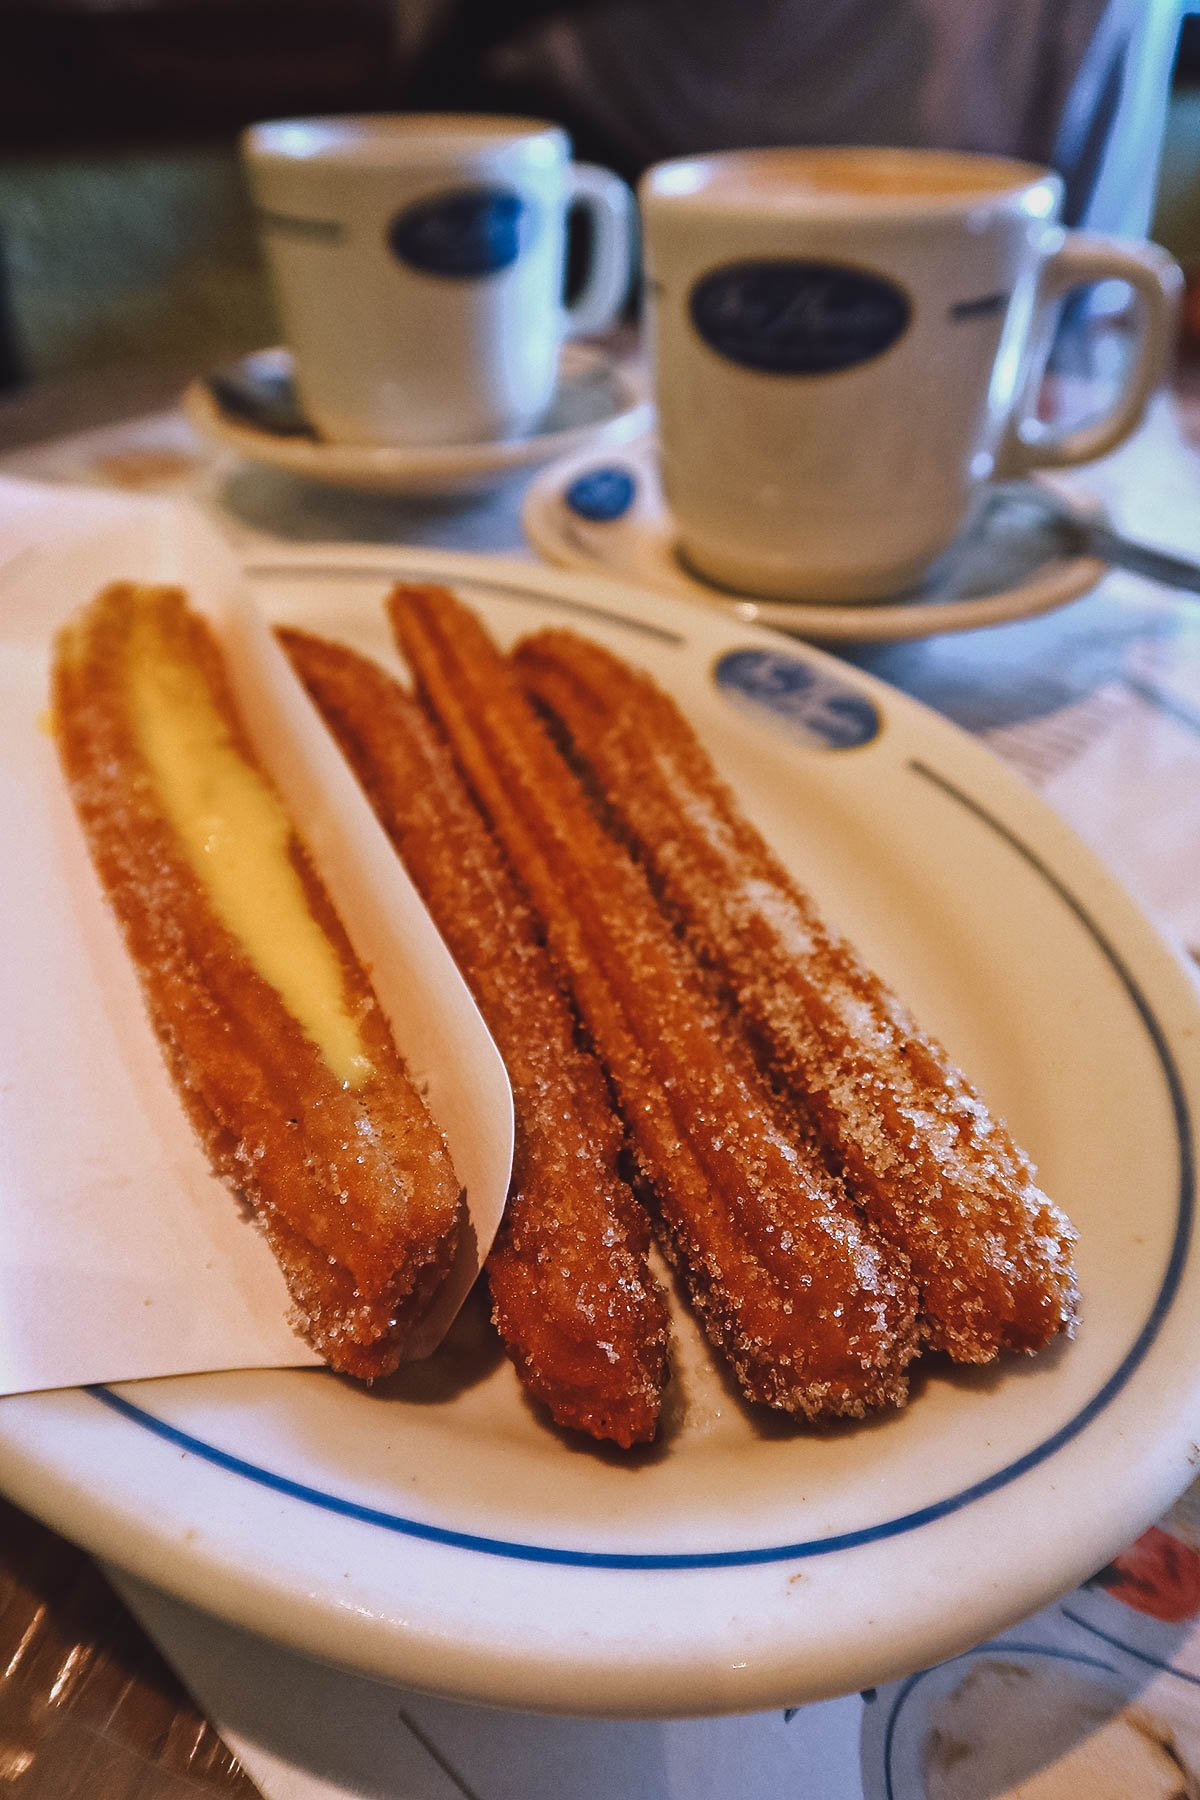 Regular and stuffed churros with hot chocolate